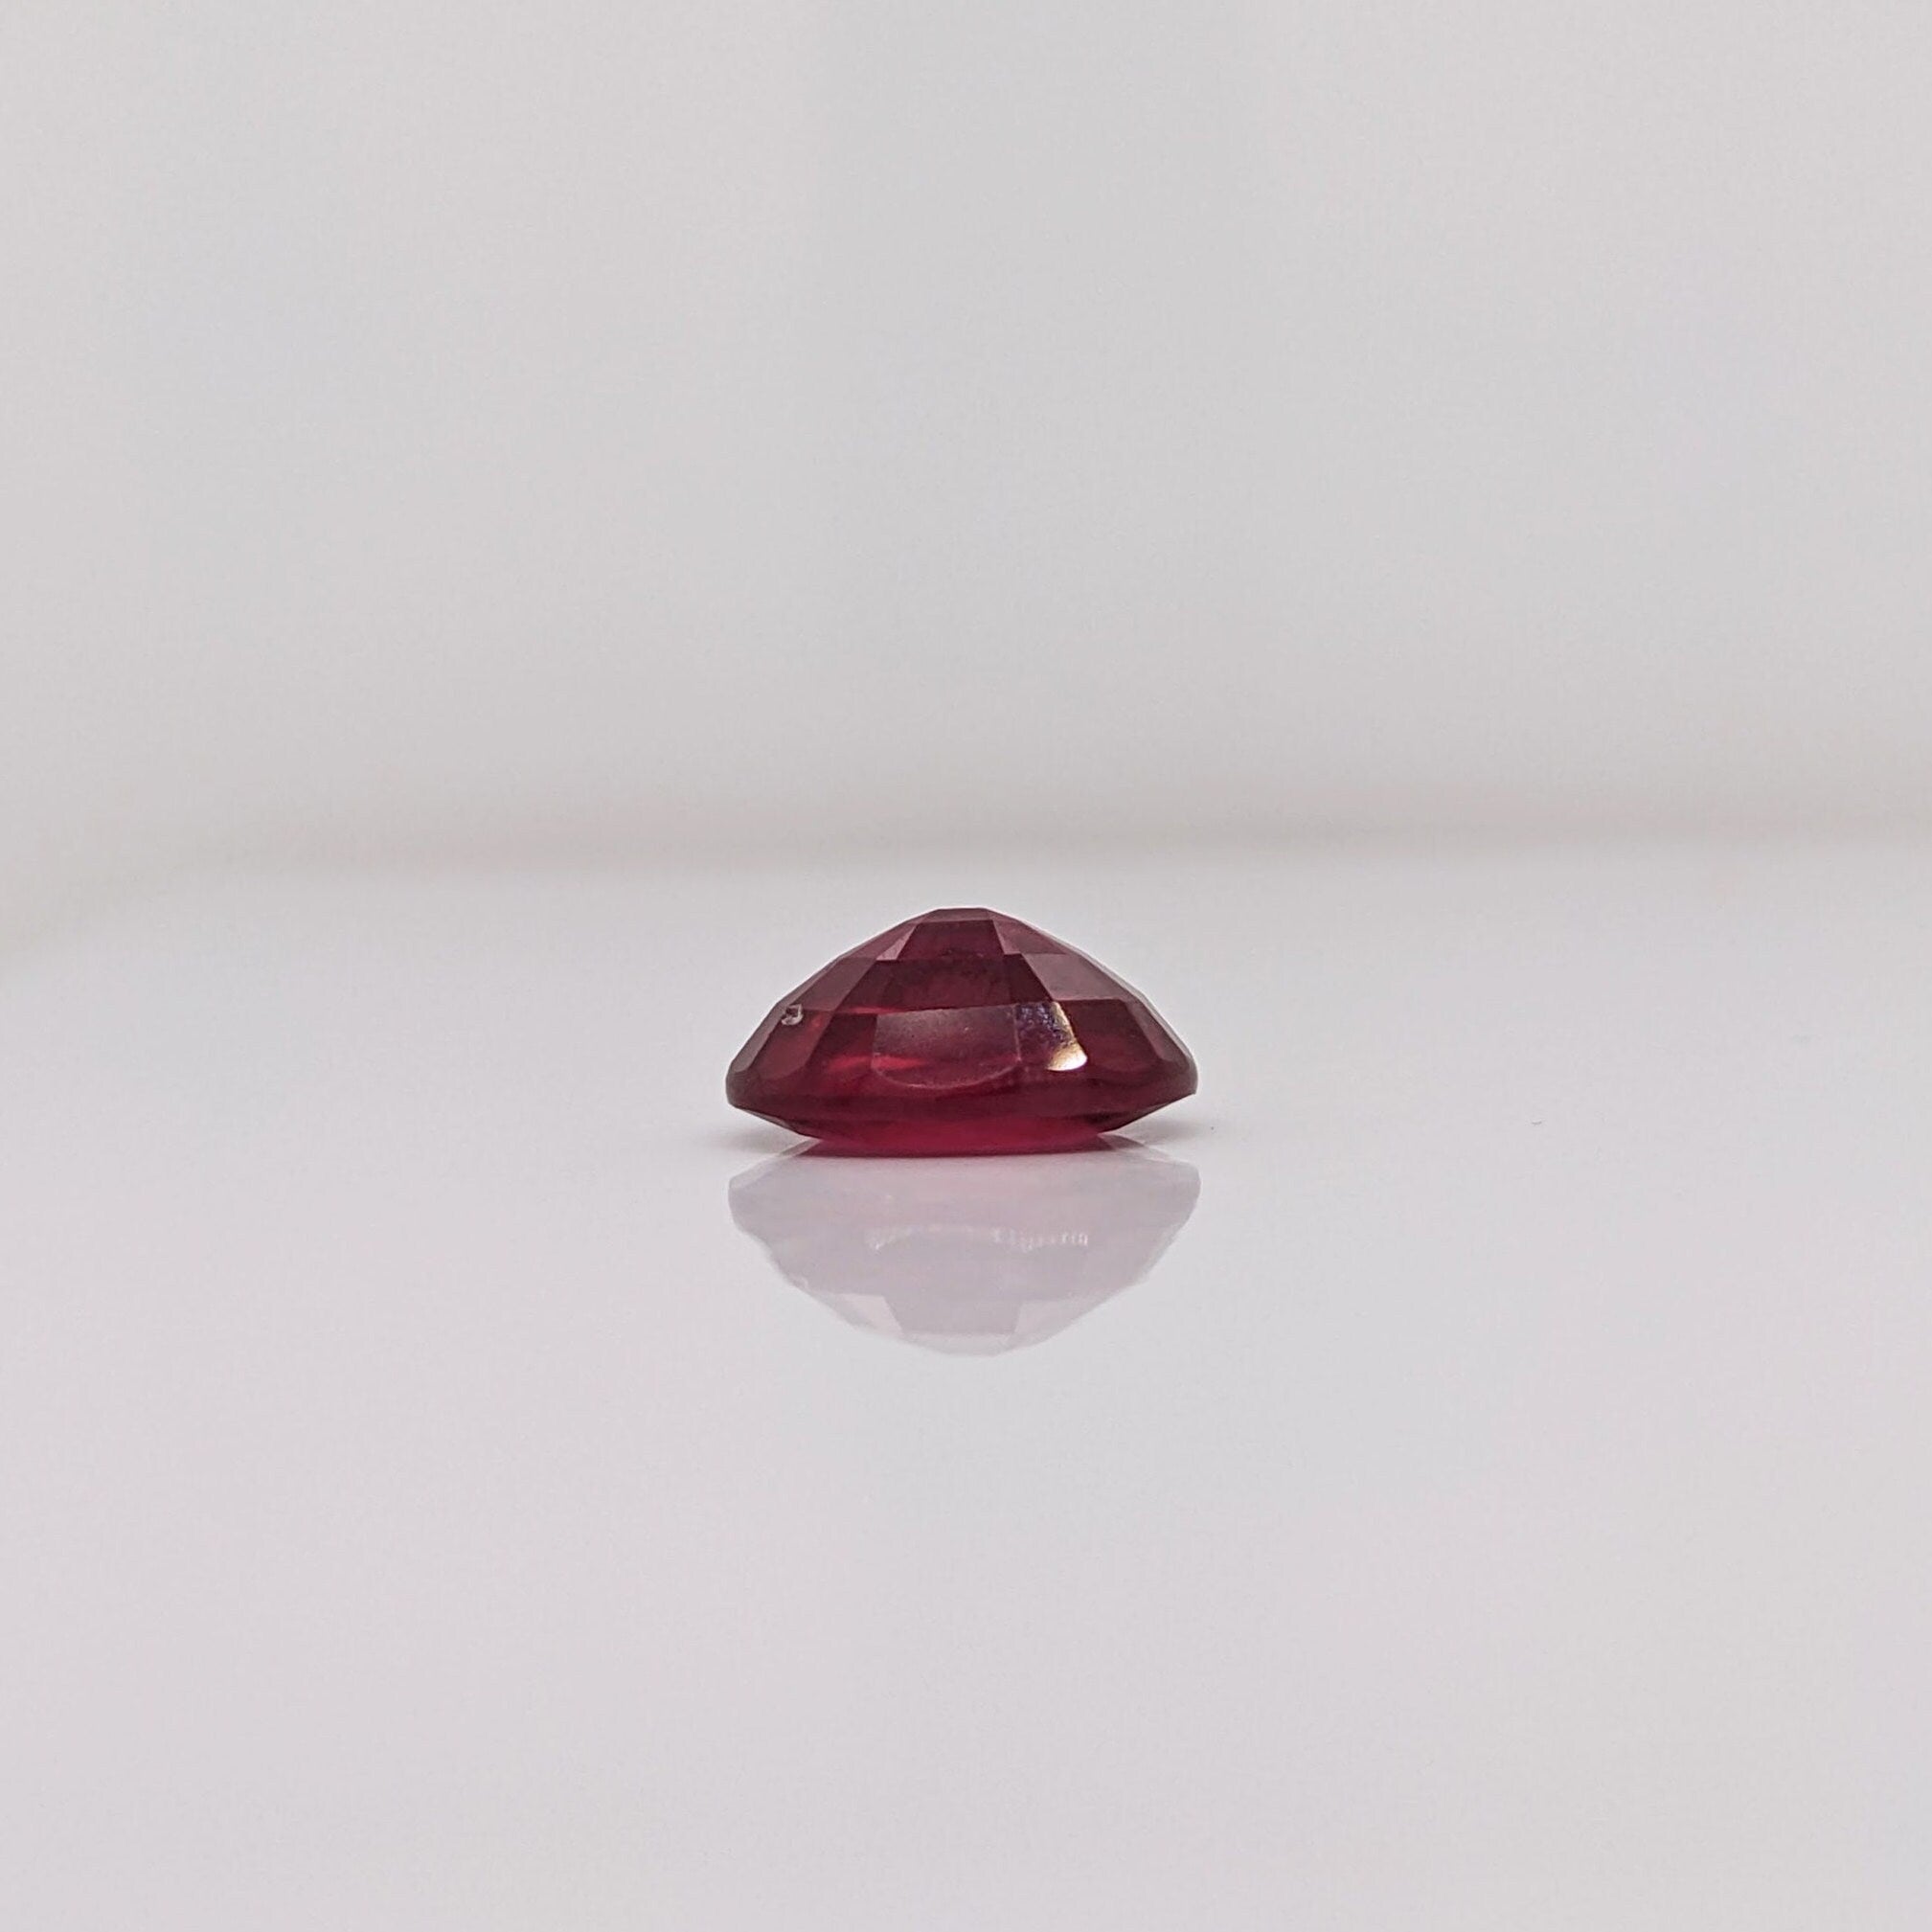 Pigeon Blood Red Madagascar Ruby Loose Gemstones | Oval | 6x4mm 7x5mm 8x6mm 9x7mm 10x8mm 11x9mm | July Birthstone | Stone Setting |Certified